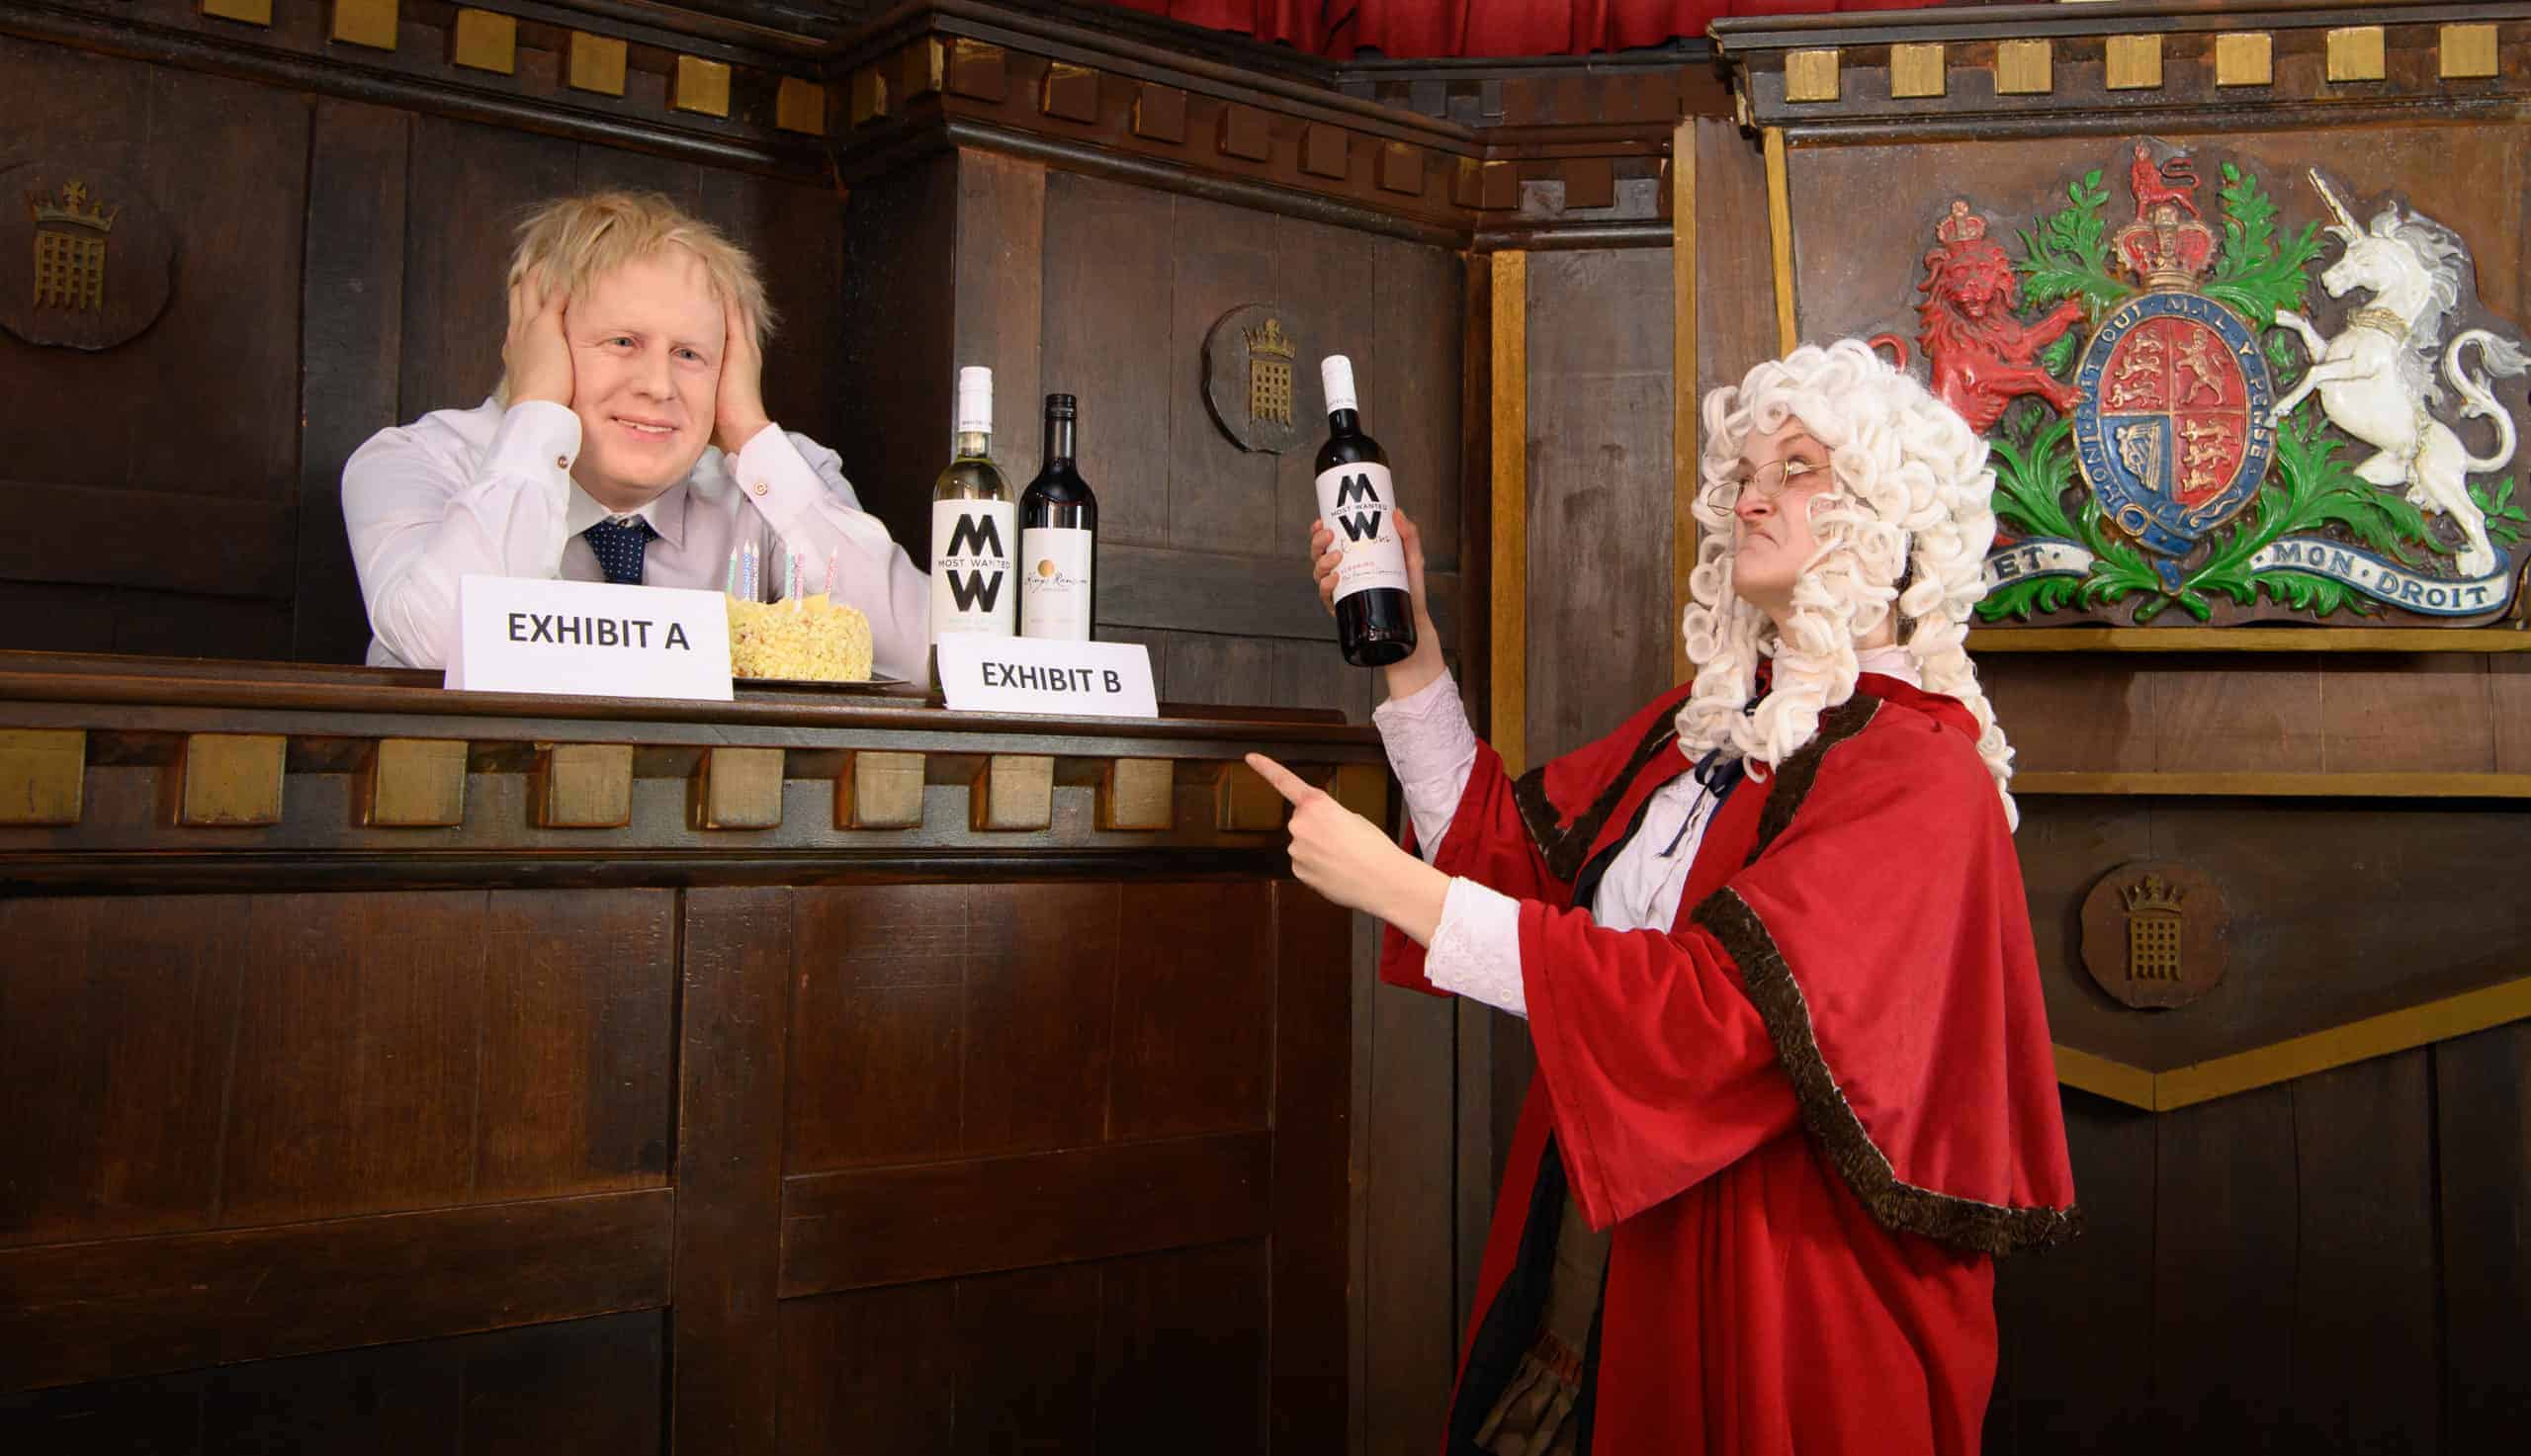 The London Dungeon’s Judge channels her inner Sue Gray and puts the Prime Minister in the dock at the famous South Bank attraction - will Partygate banish him to join the rollcall of the Dungeon’s most famous nefarious characters?  J HORDLE / INhouse images